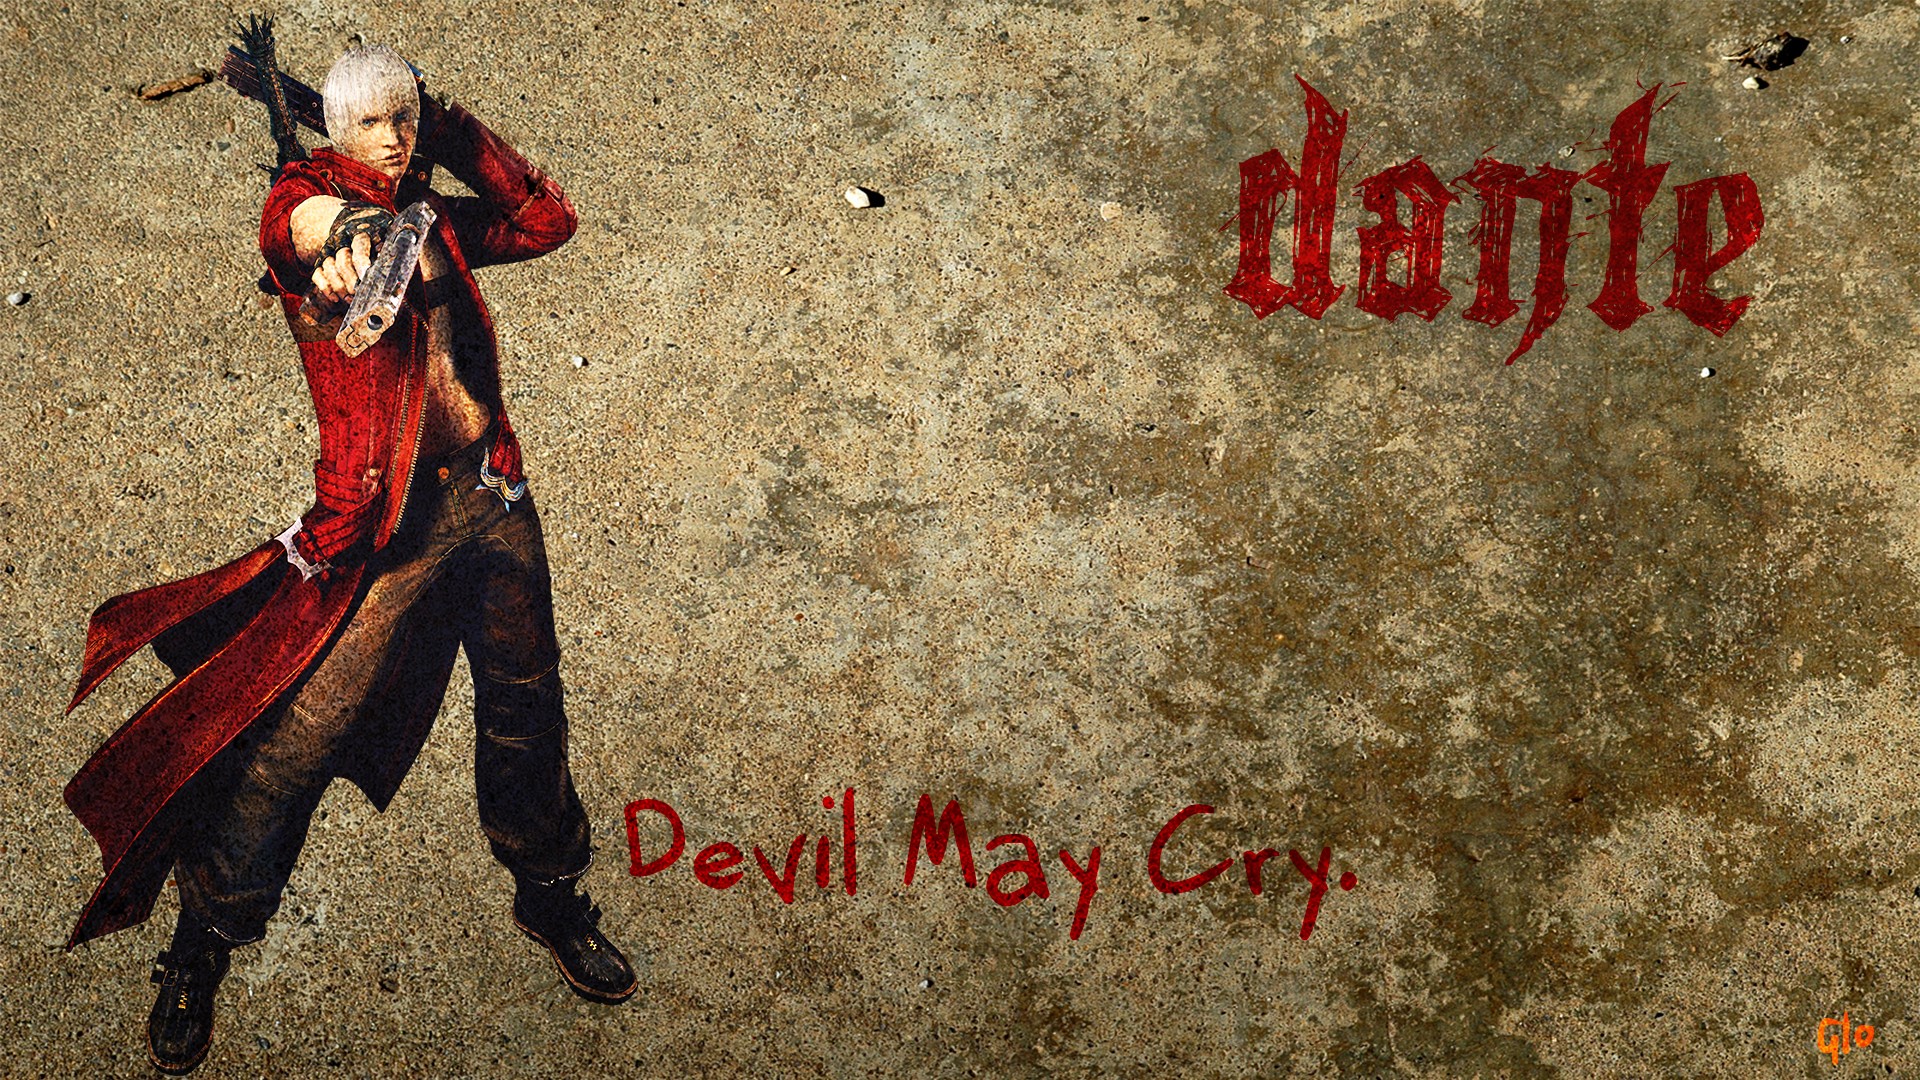 General 1920x1080 DmC: Devil May Cry Devil May Cry Dante (Devil May Cry) video games video game art gun video game men dual wield